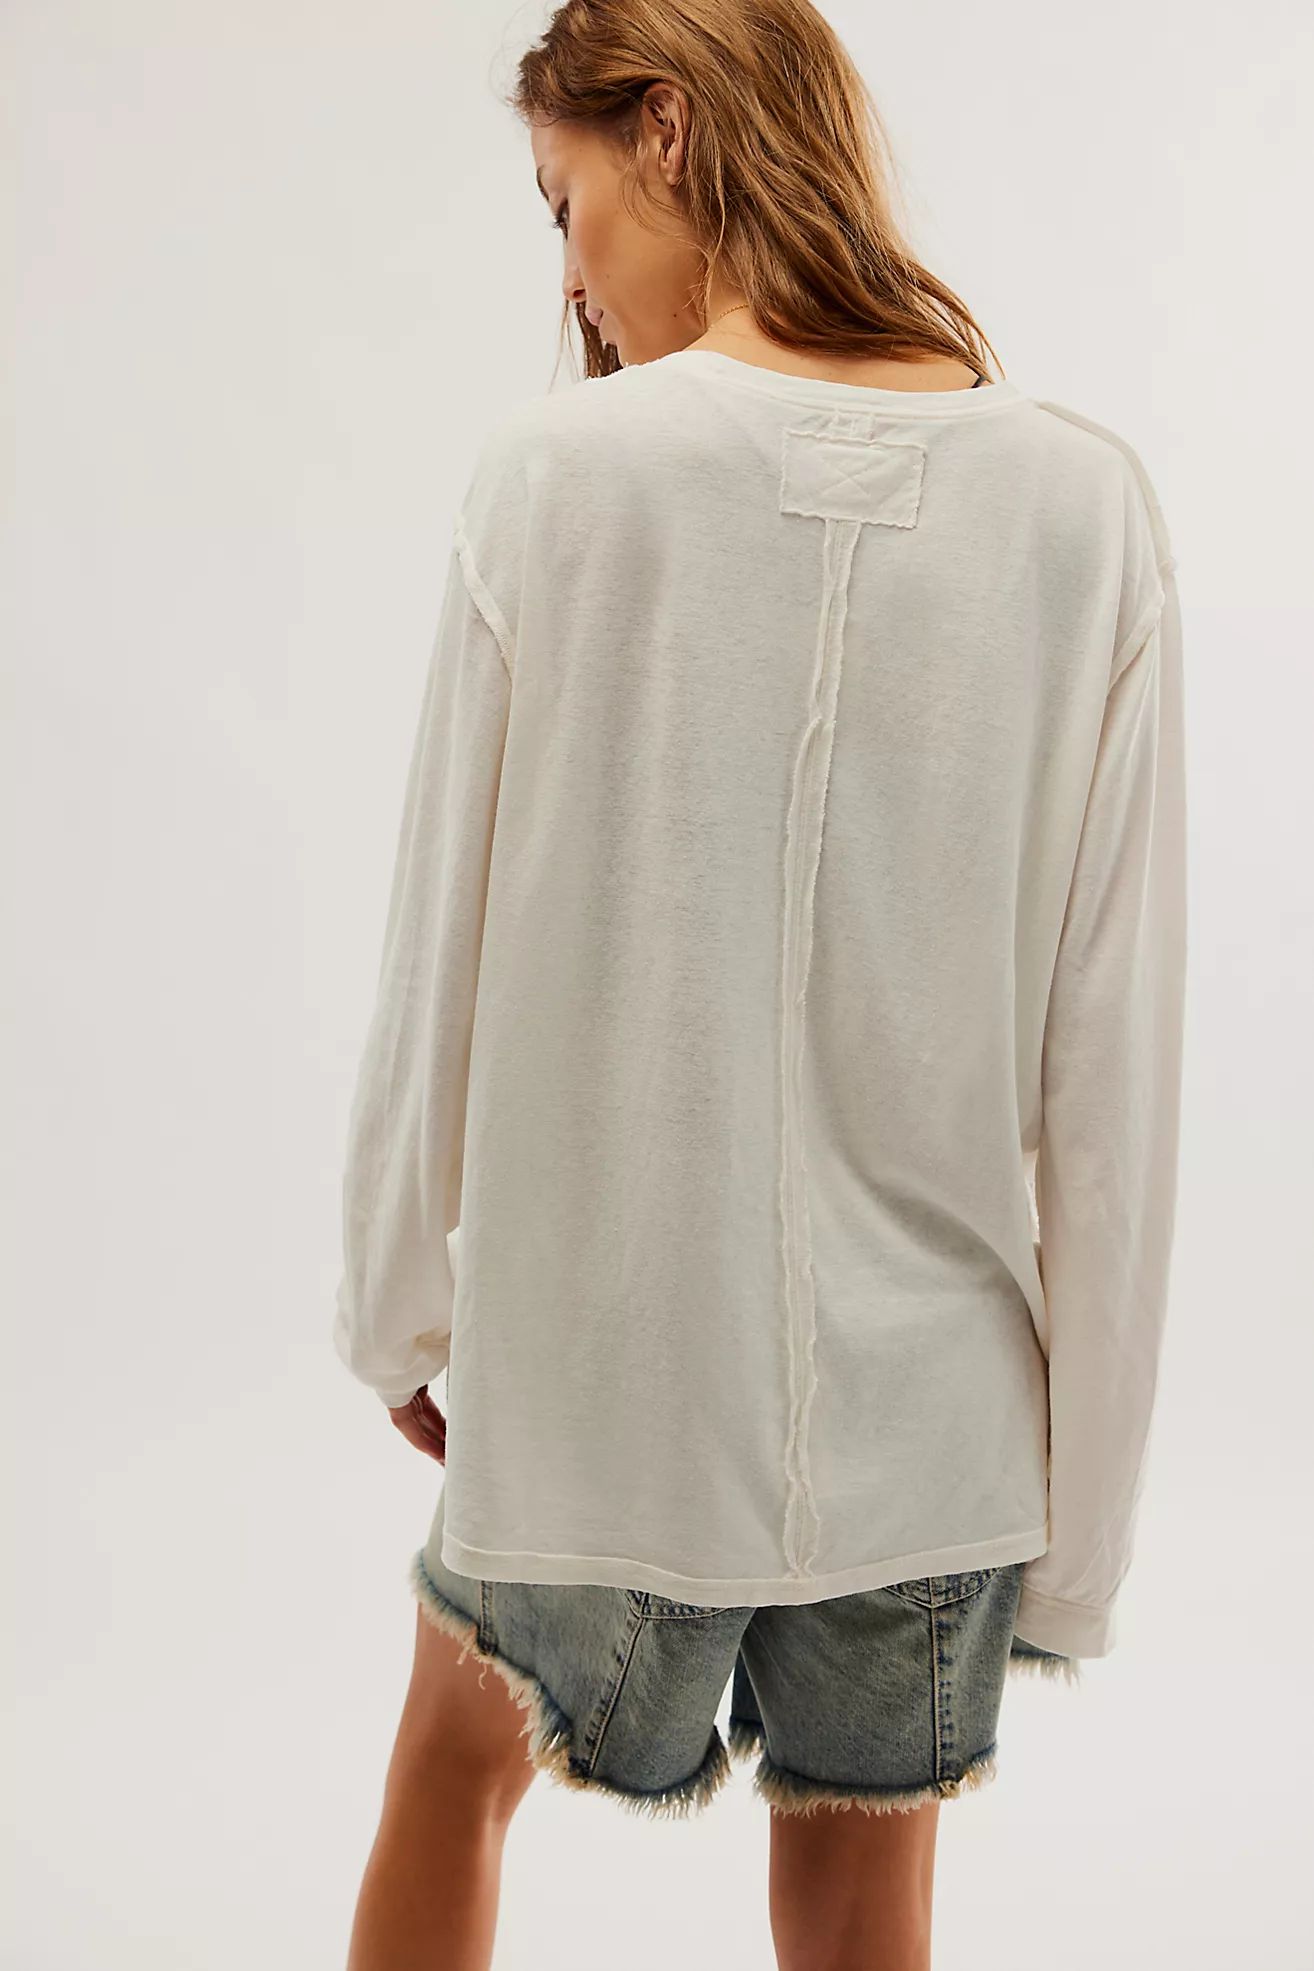 Care FP Morning Noon And Night Hemp Tee | Free People (Global - UK&FR Excluded)